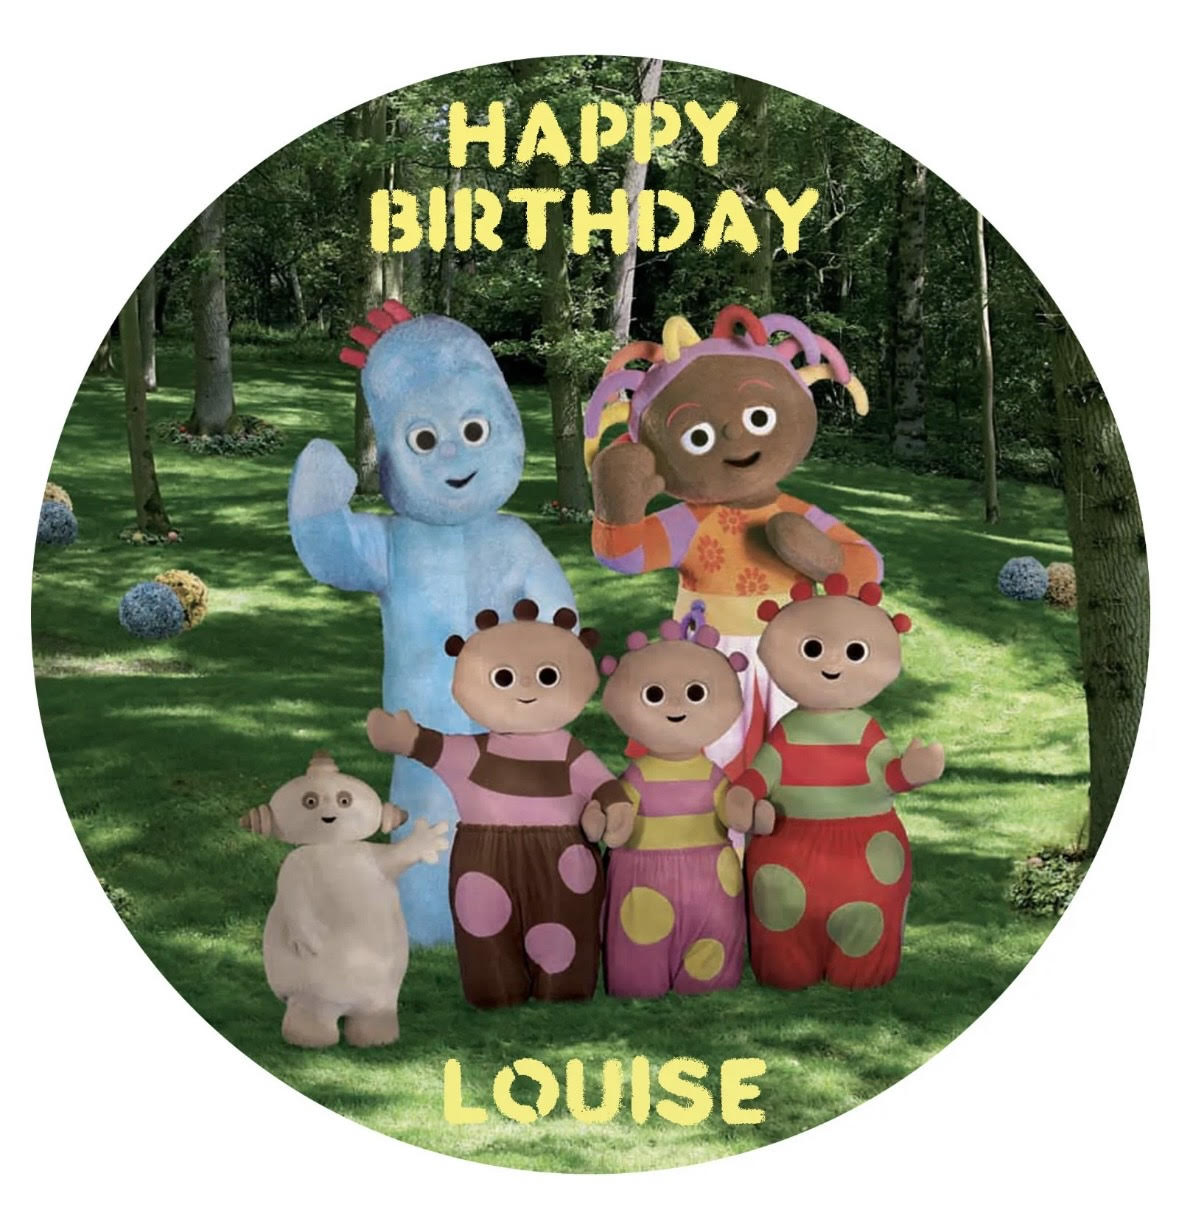 In The Night Garden Round Cake Edible Icing Image Topper 19cm